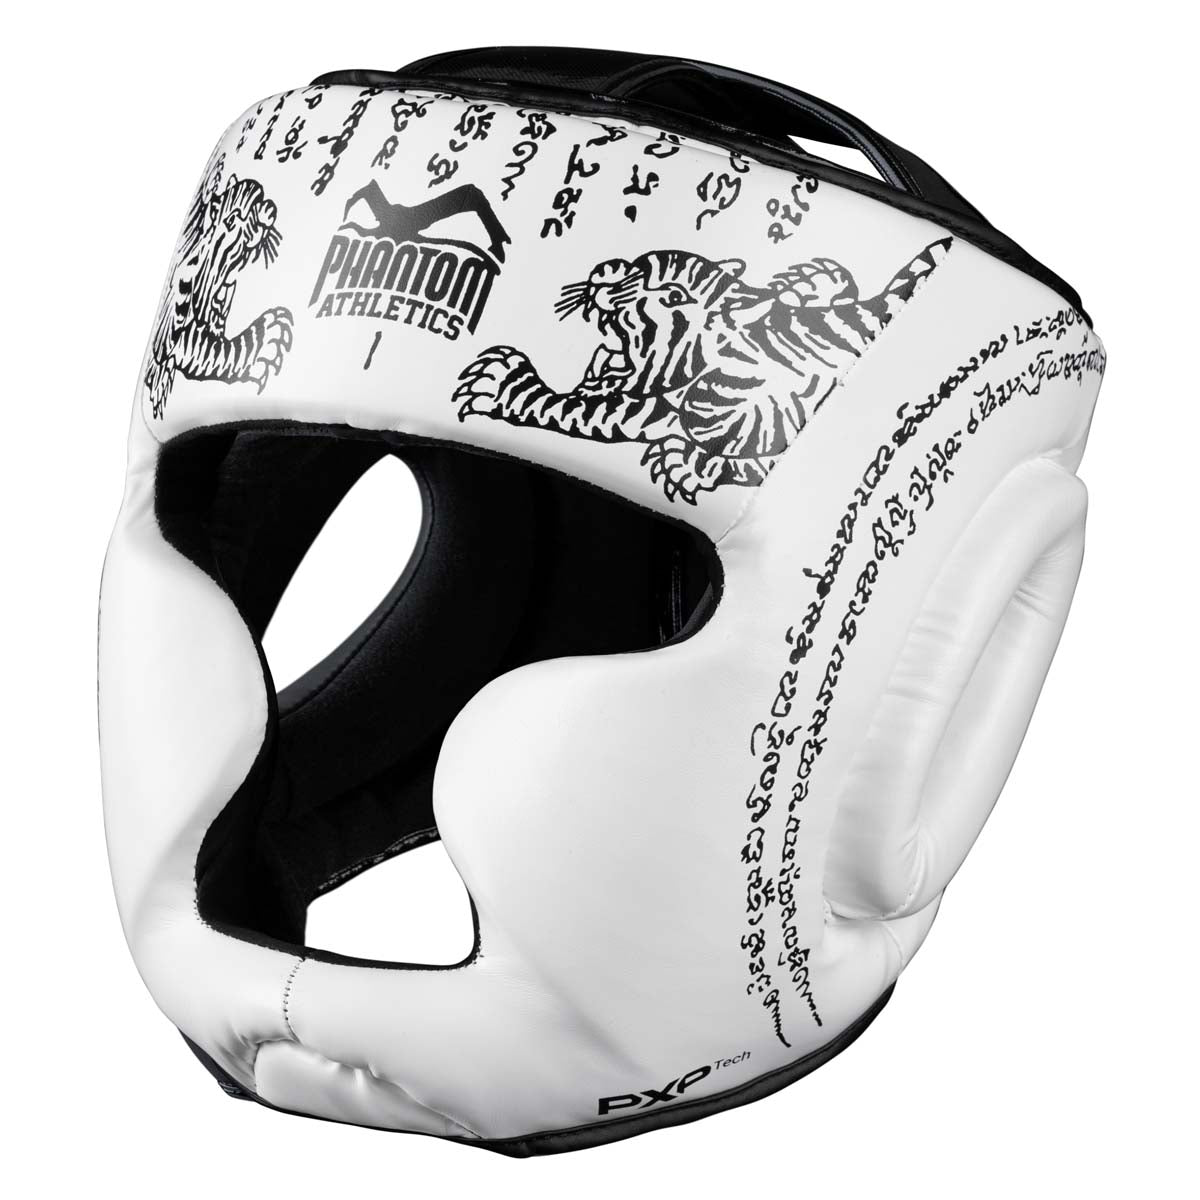 Phantom Muay Thai head protection for Thai boxing and MMA sparring, competition and training. In the traditional Sak Yant design and the color white.